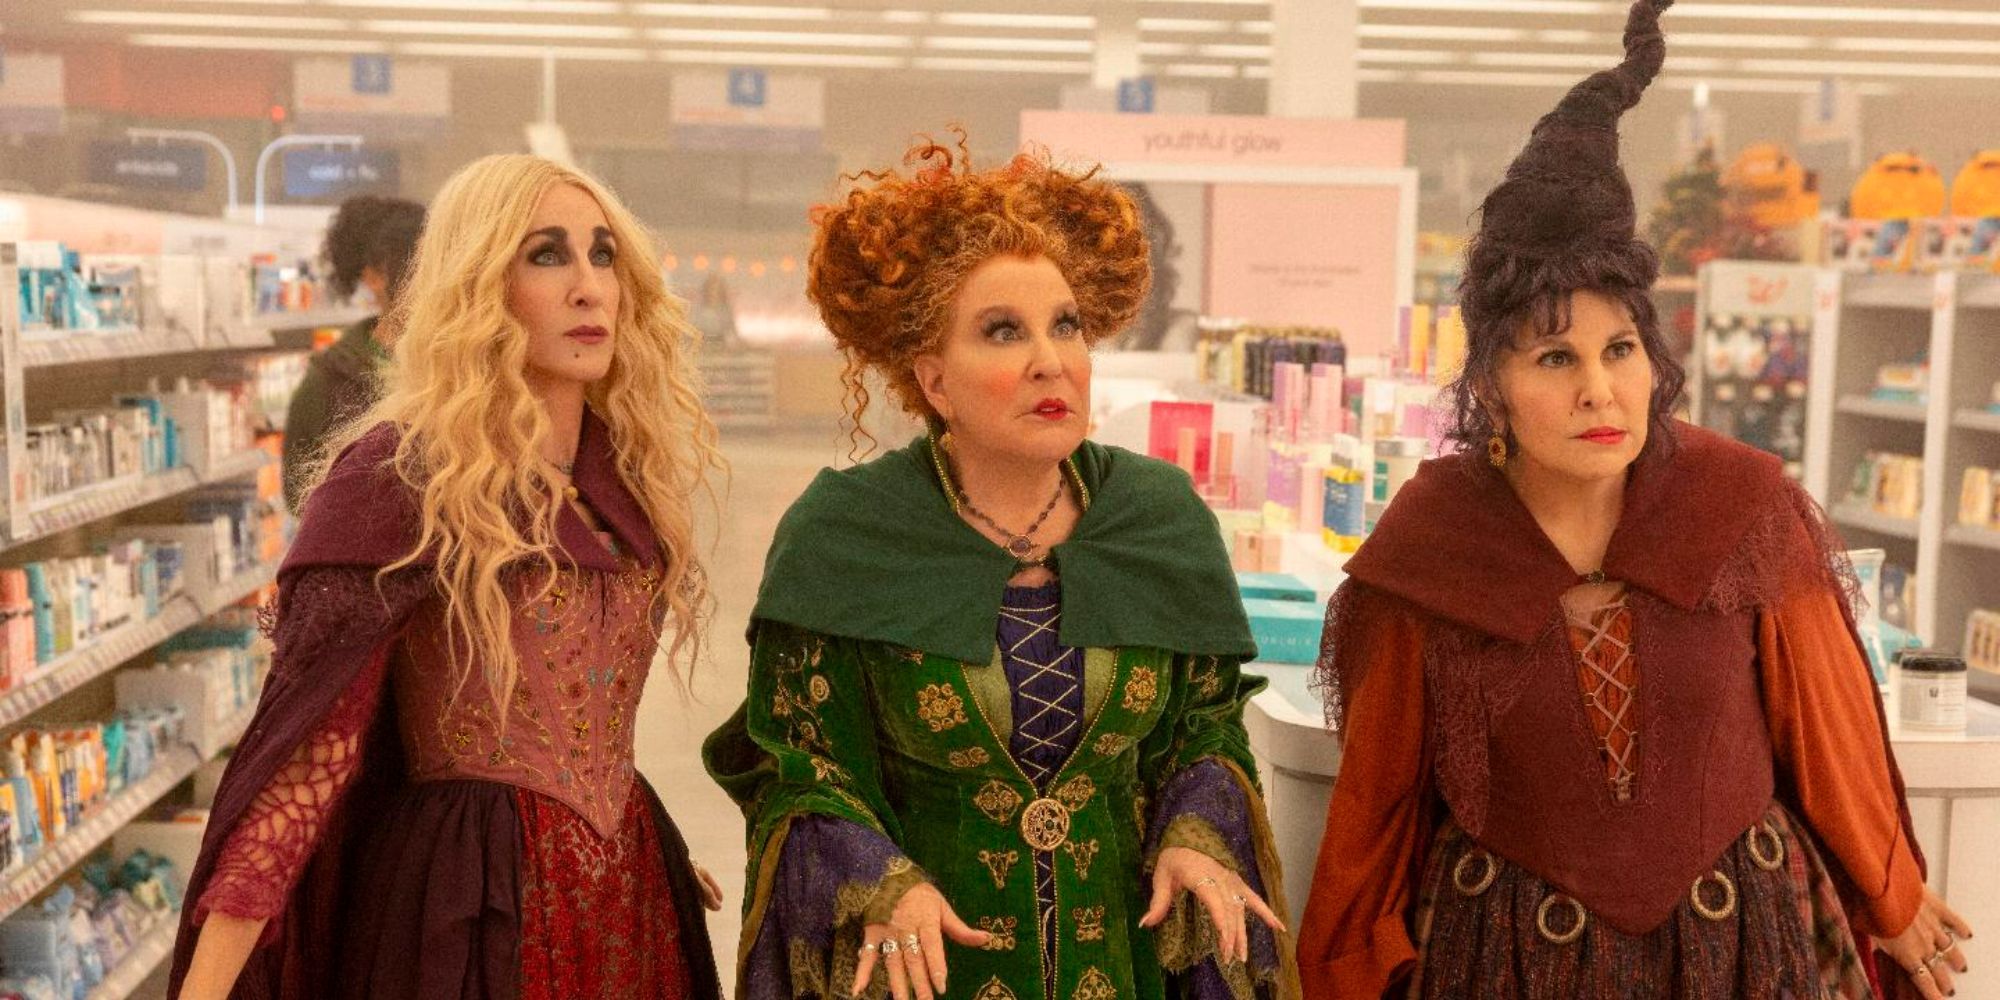 “I Was Available”: Original Hocus Pocus Director Opens Up About Disney+ Sequel Disappointment